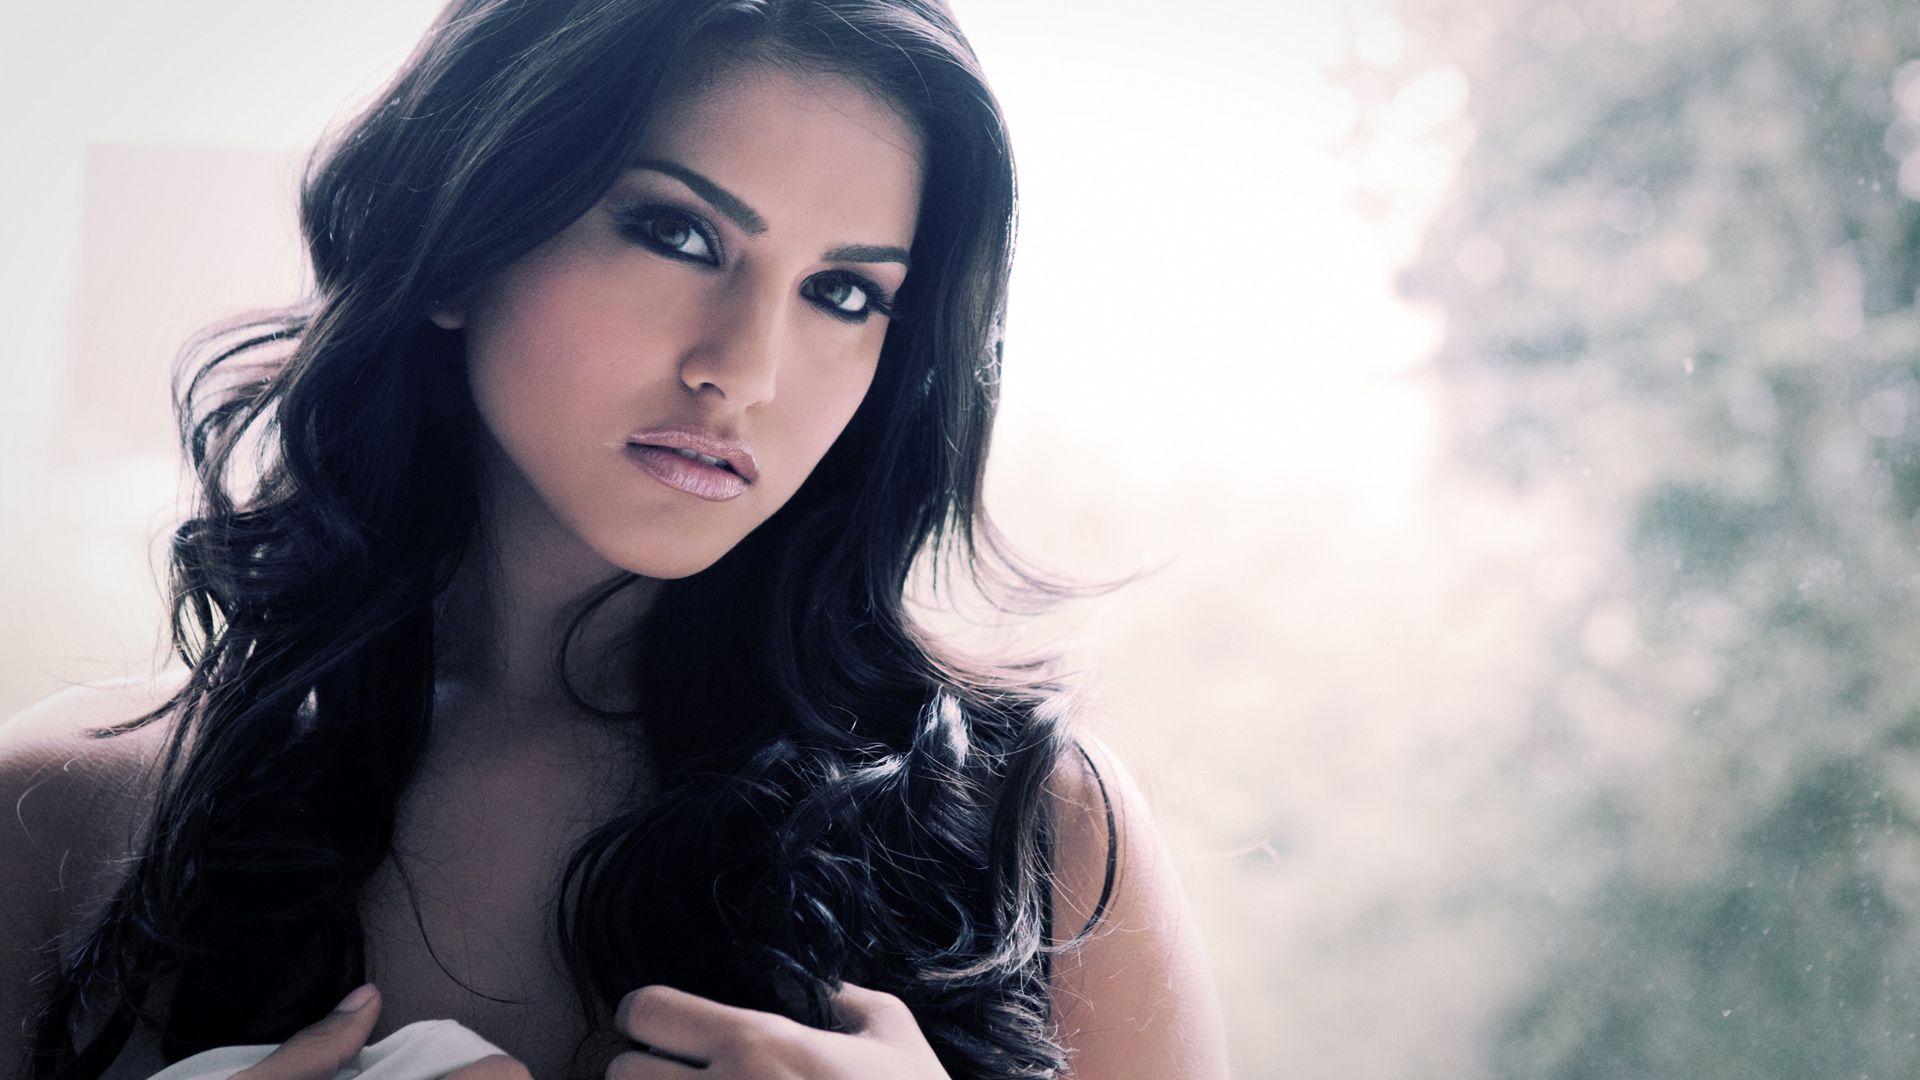 Sunny Leone Wallpapers - Wallpaper Cave